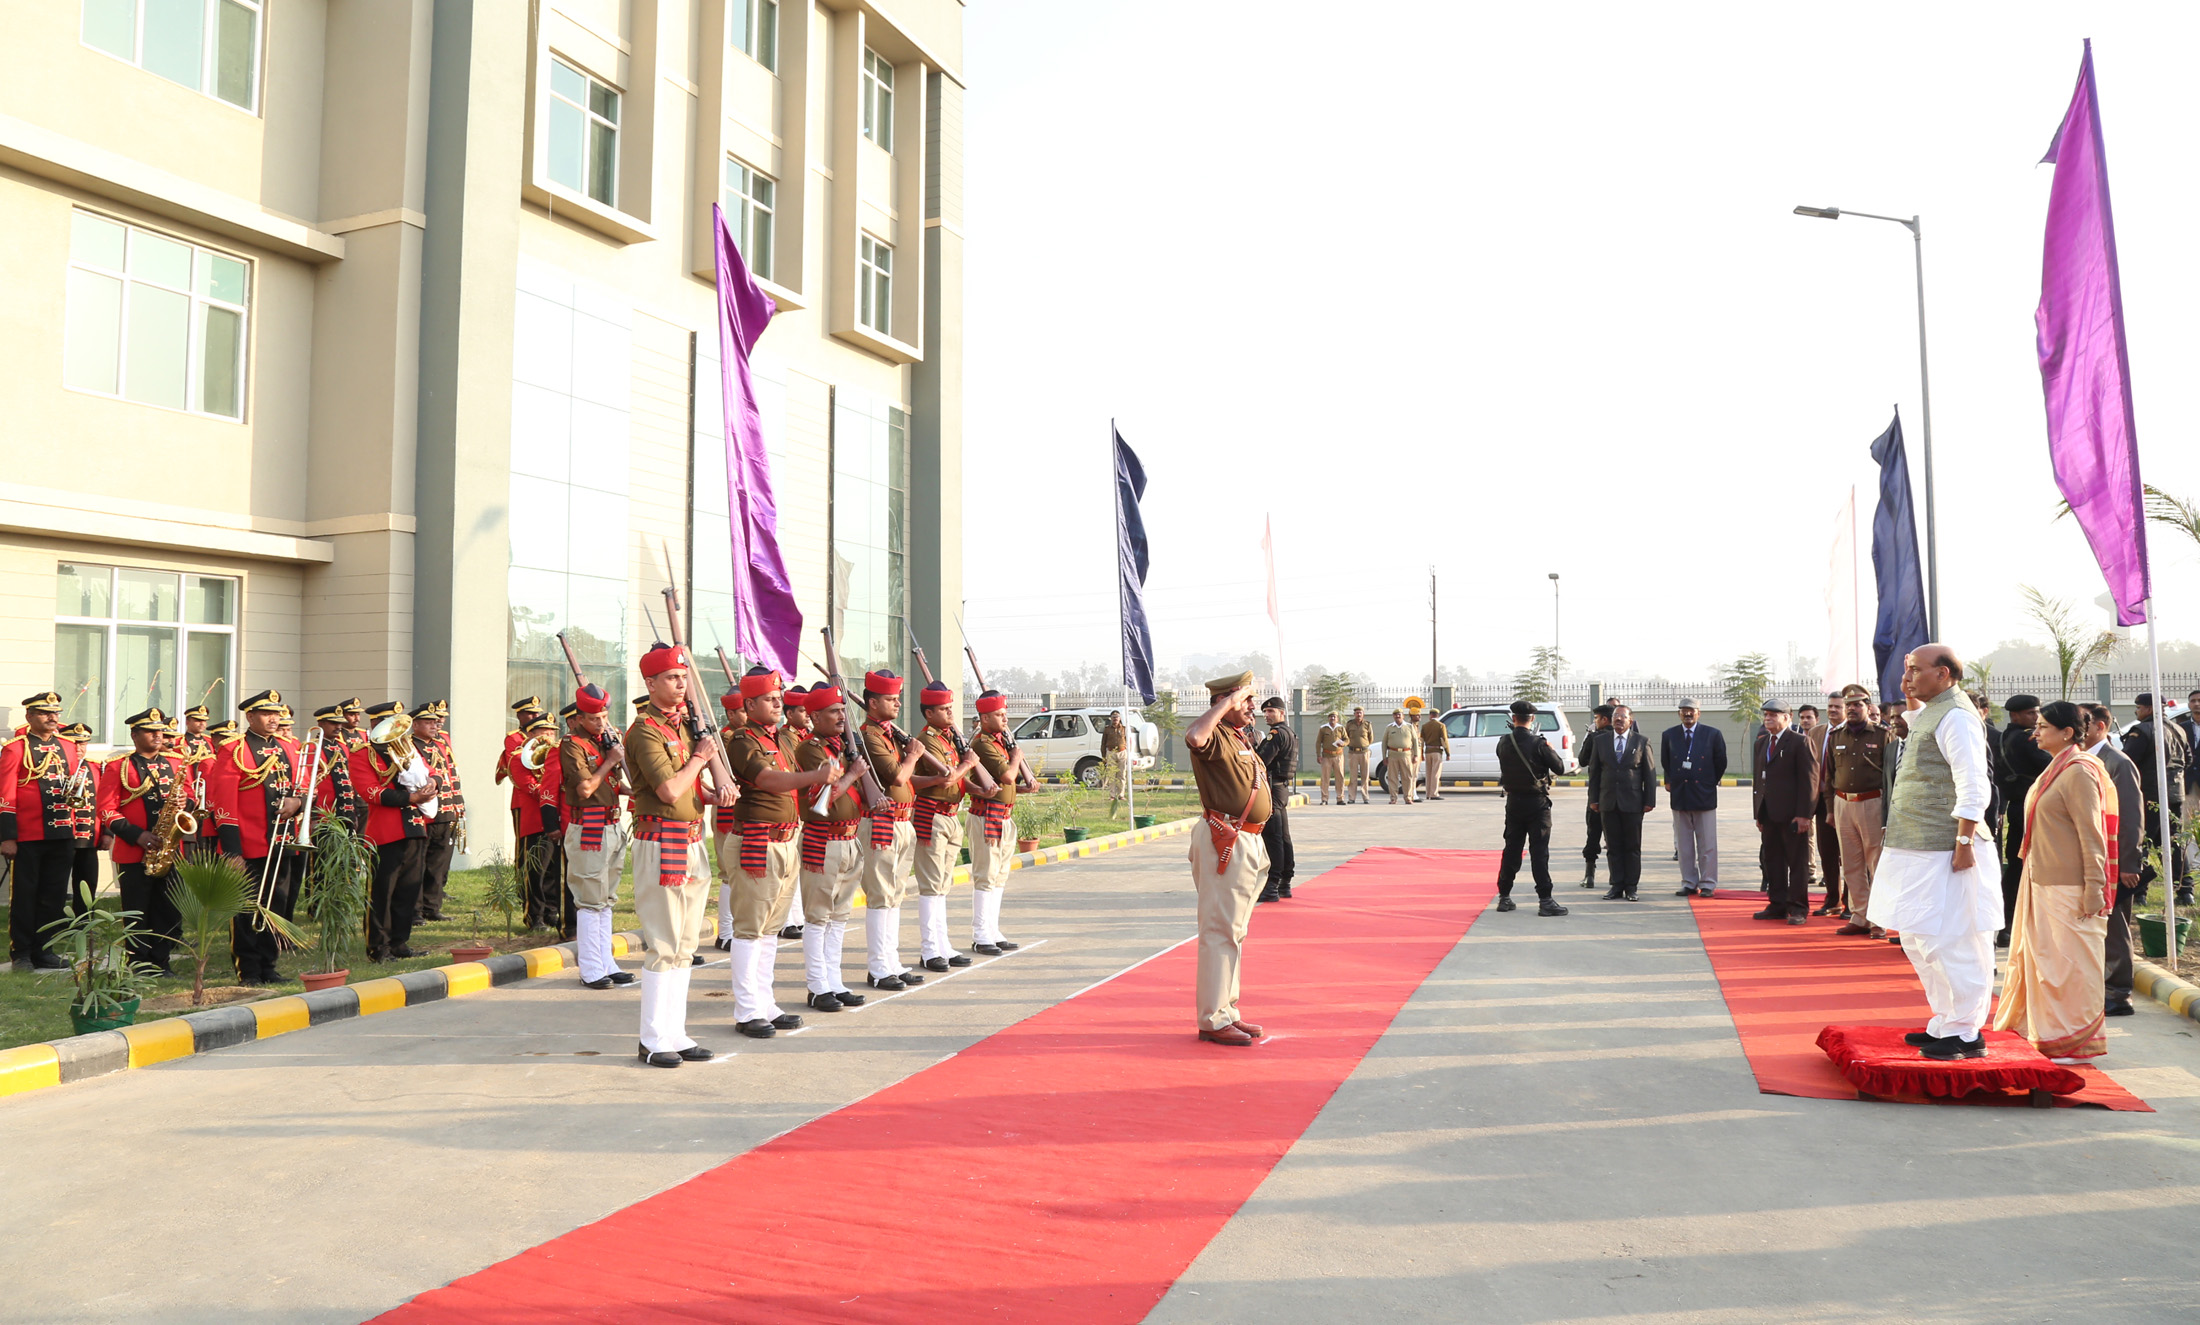 The Union Home Minister, Shri Rajnath Singh taking the salute at the inauguration of the new campus of Central Detective Training School (CDTS), in Ghaziabad on December 16, 2016.